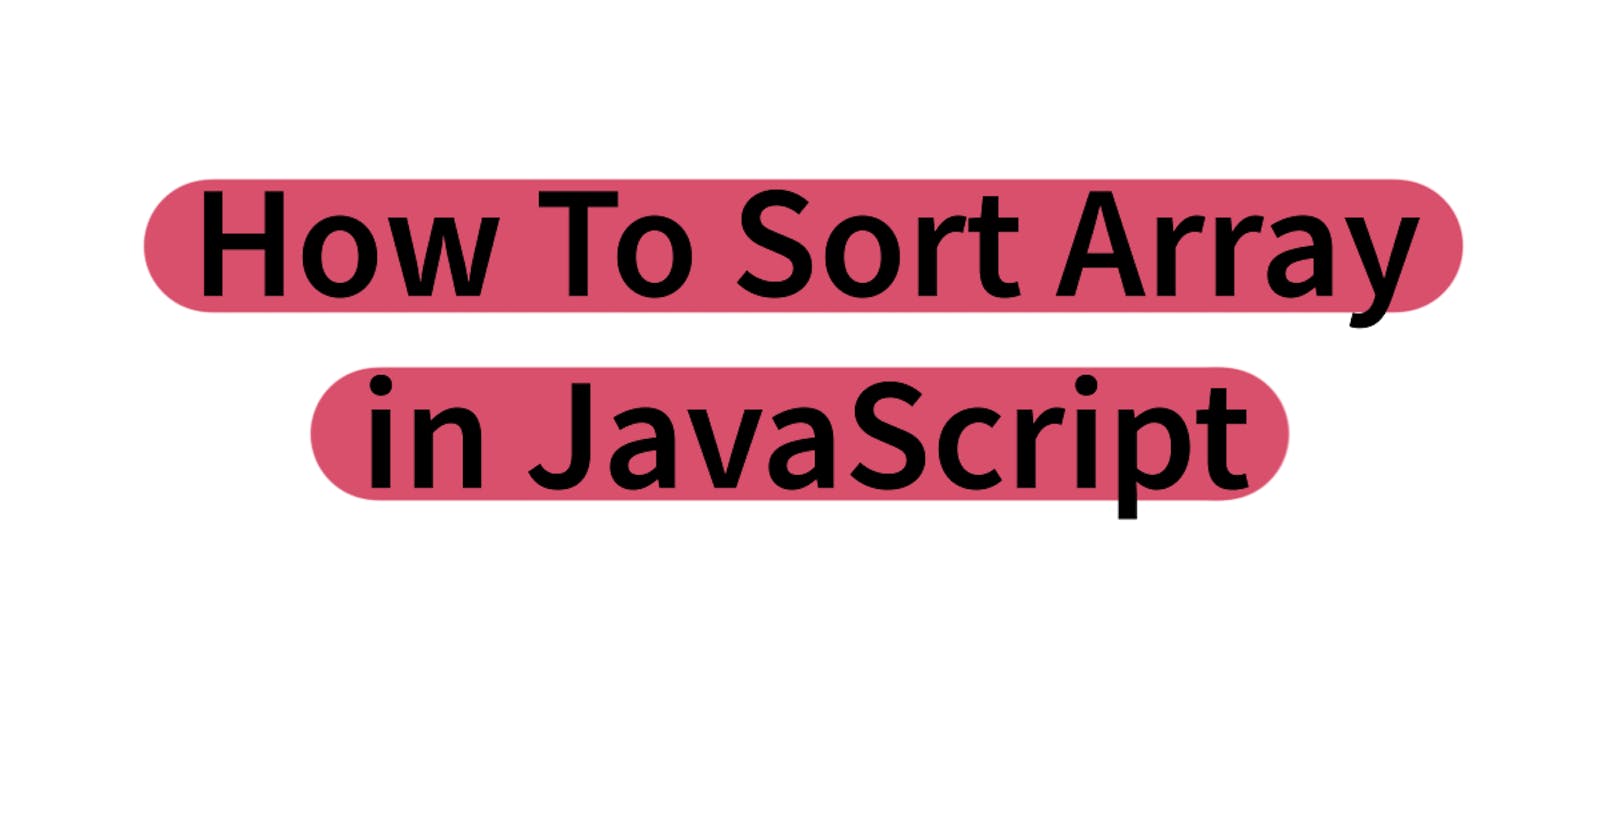 How To Sort Array in JavaScript